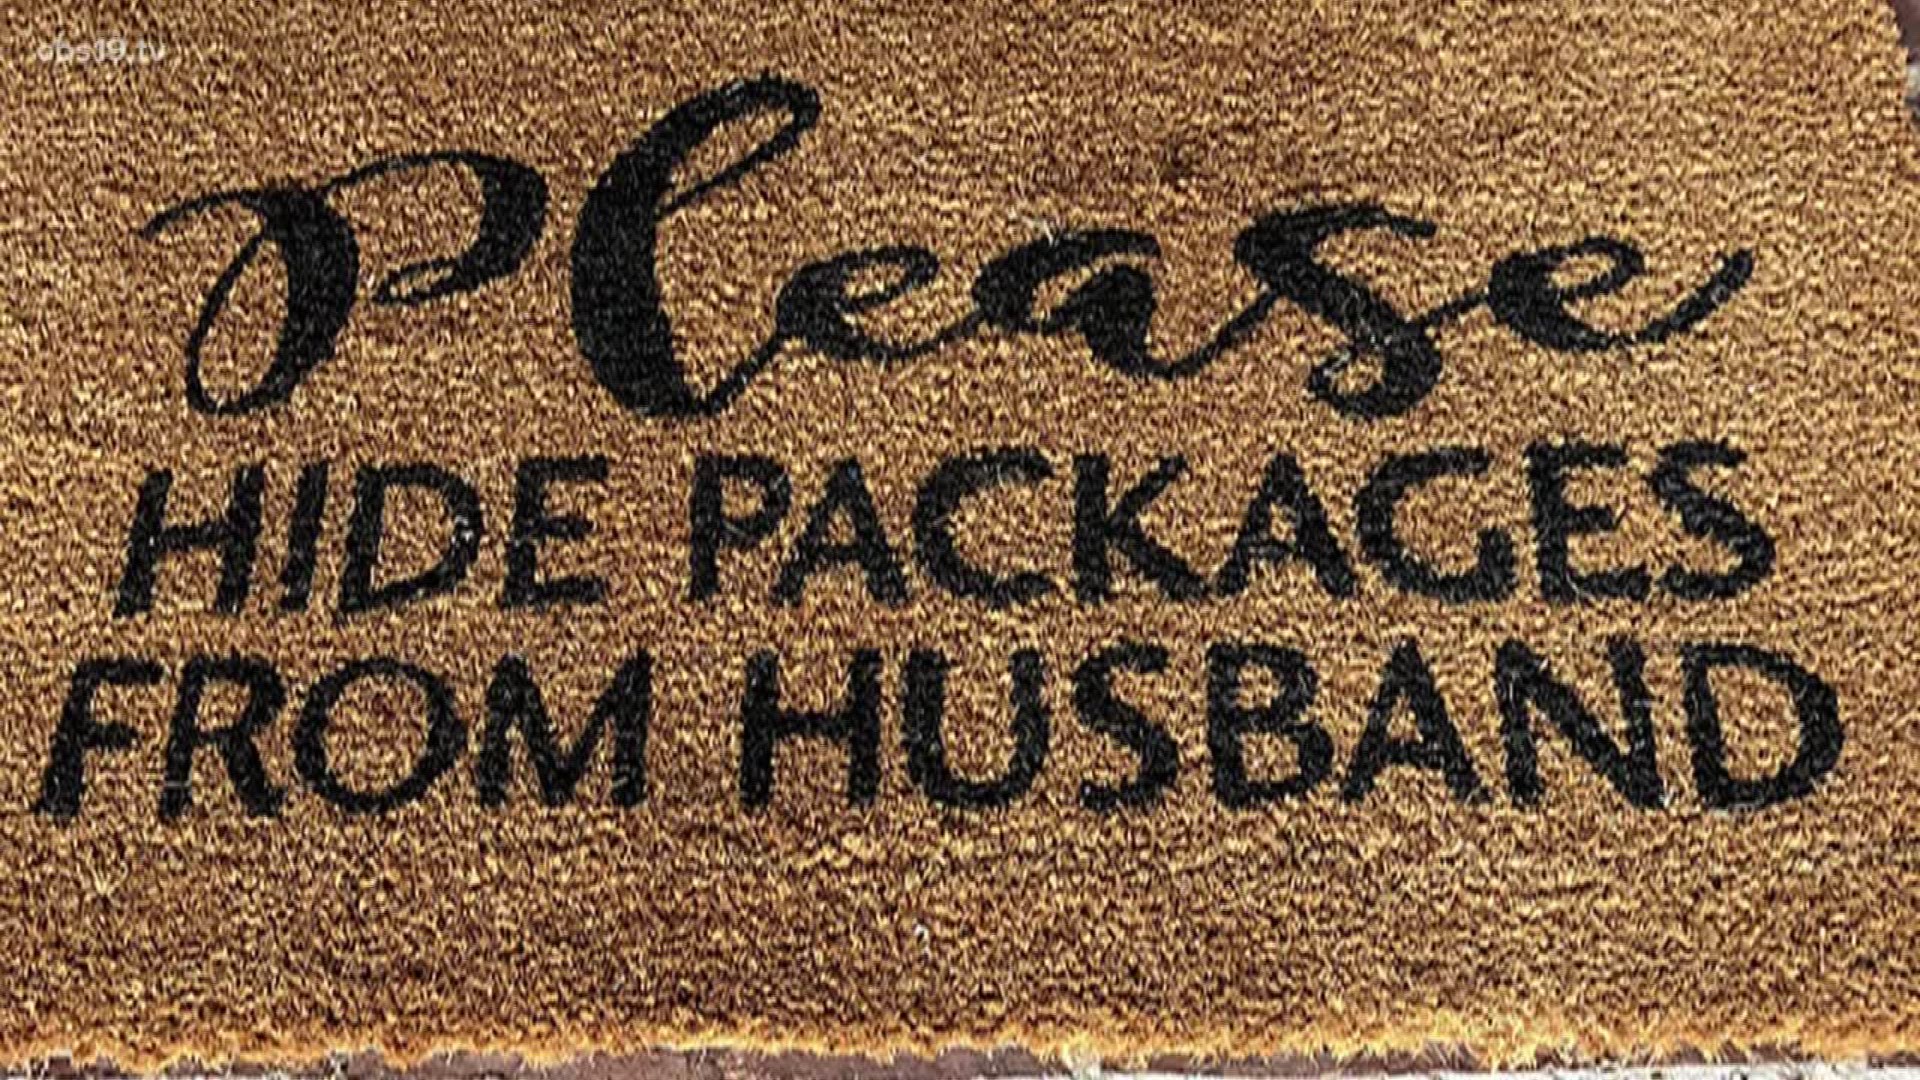 A viral video of an Amazon delivery guy taking a hilarious doormat message to heart.